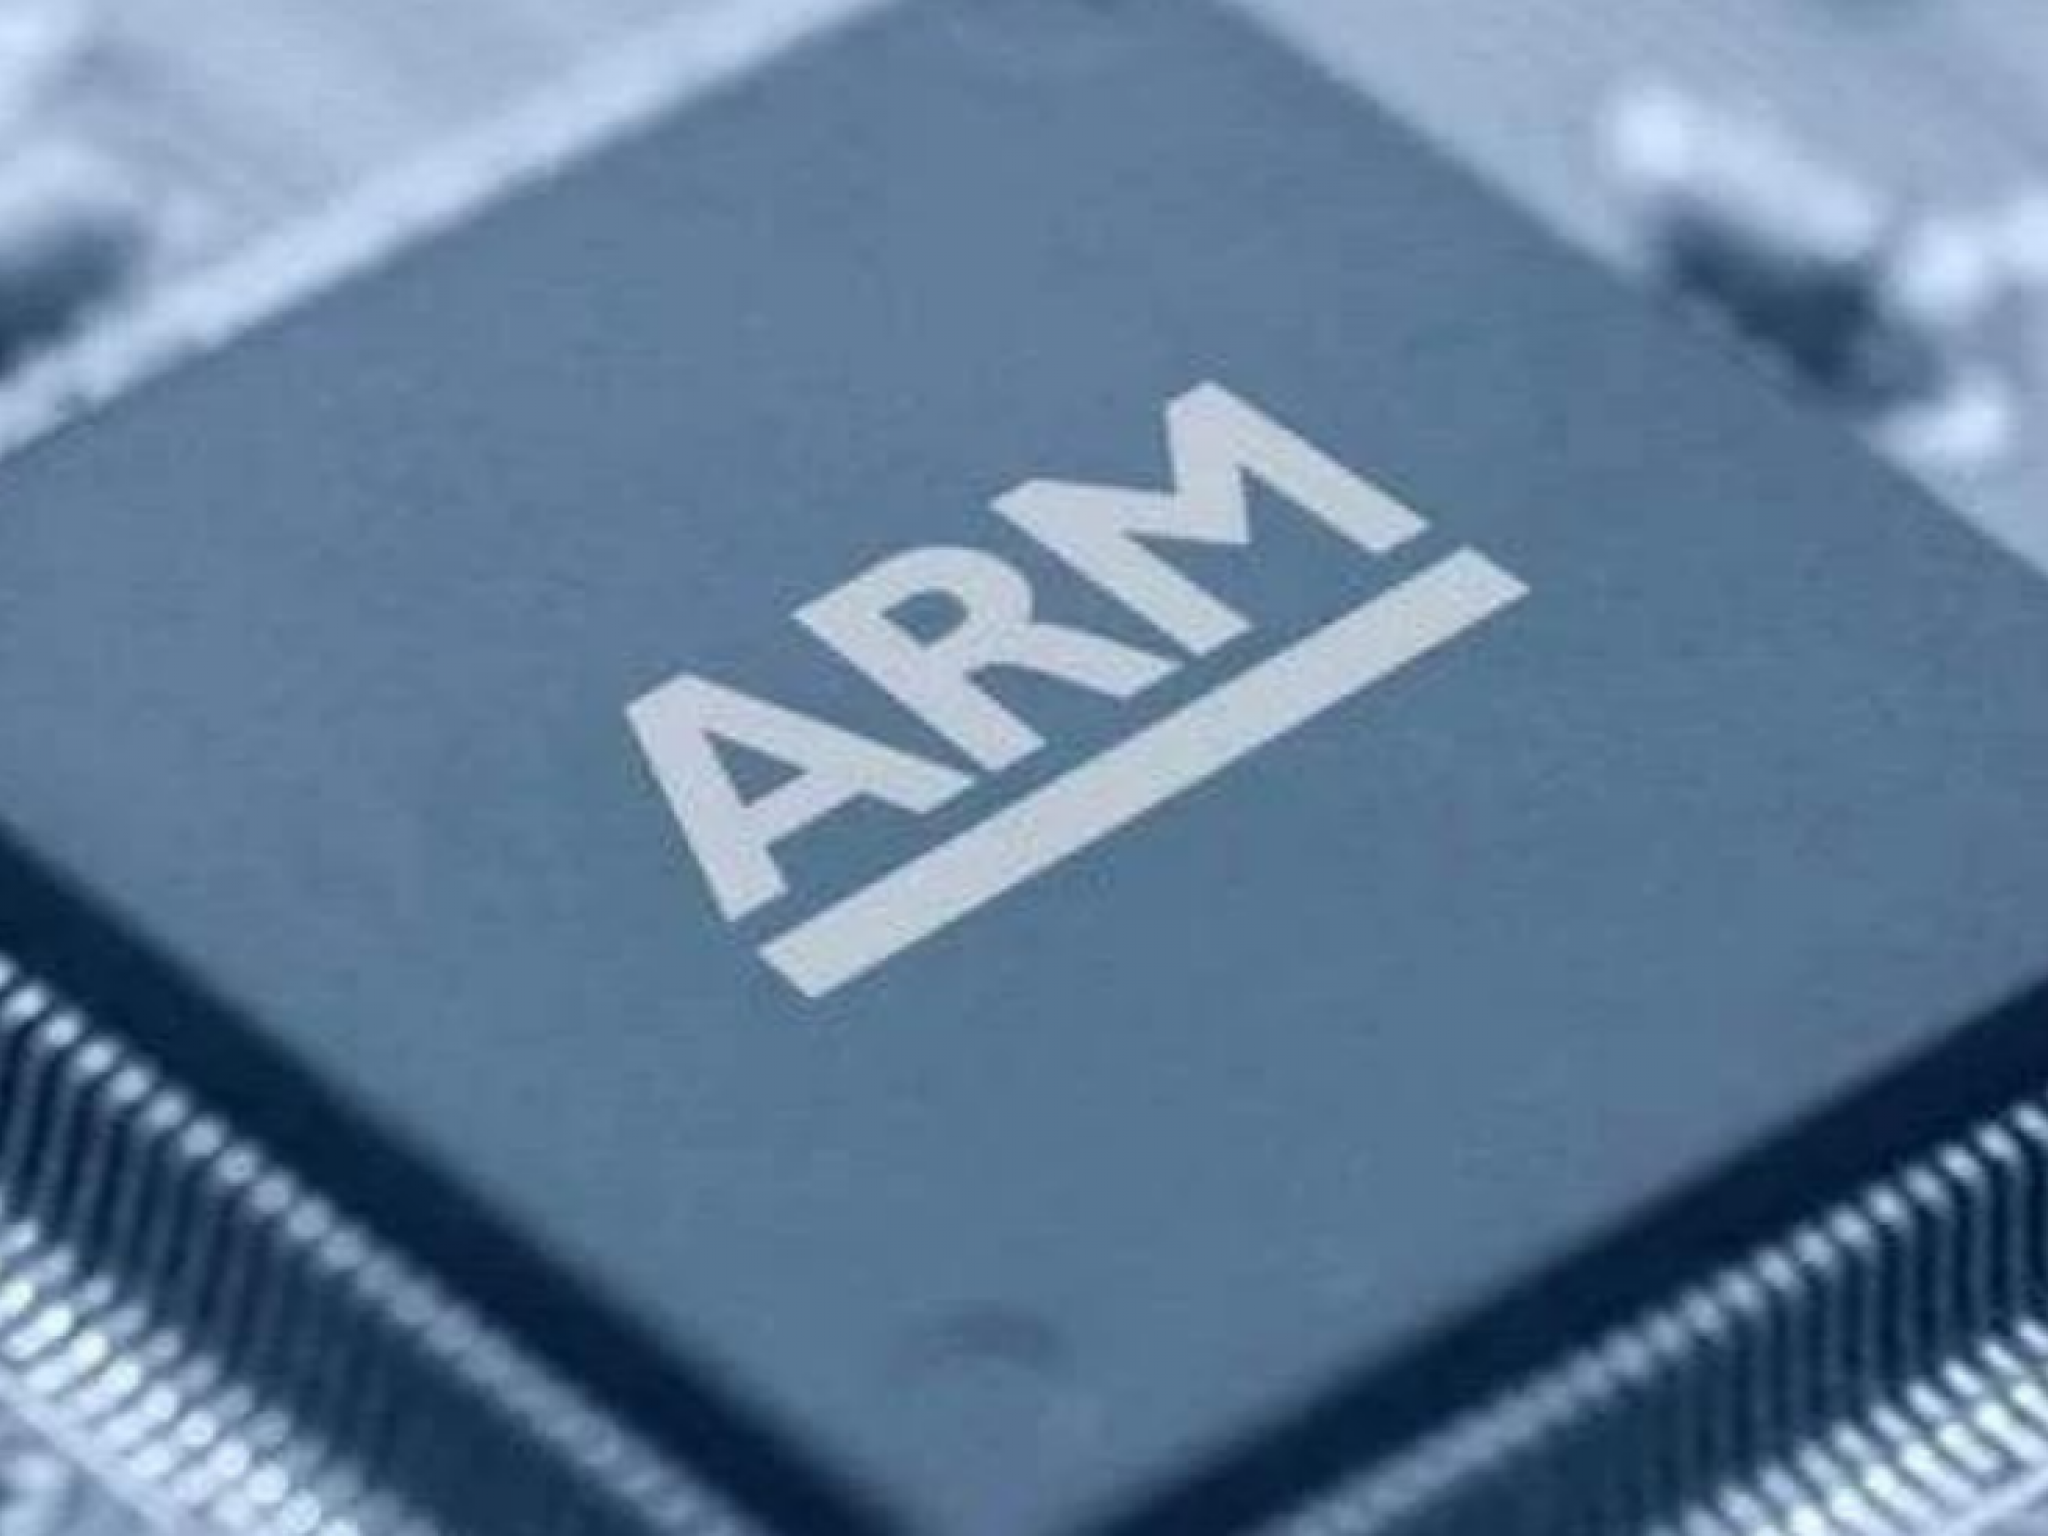  whats-going-on-with-chipmaker-arm-holdings-stock 